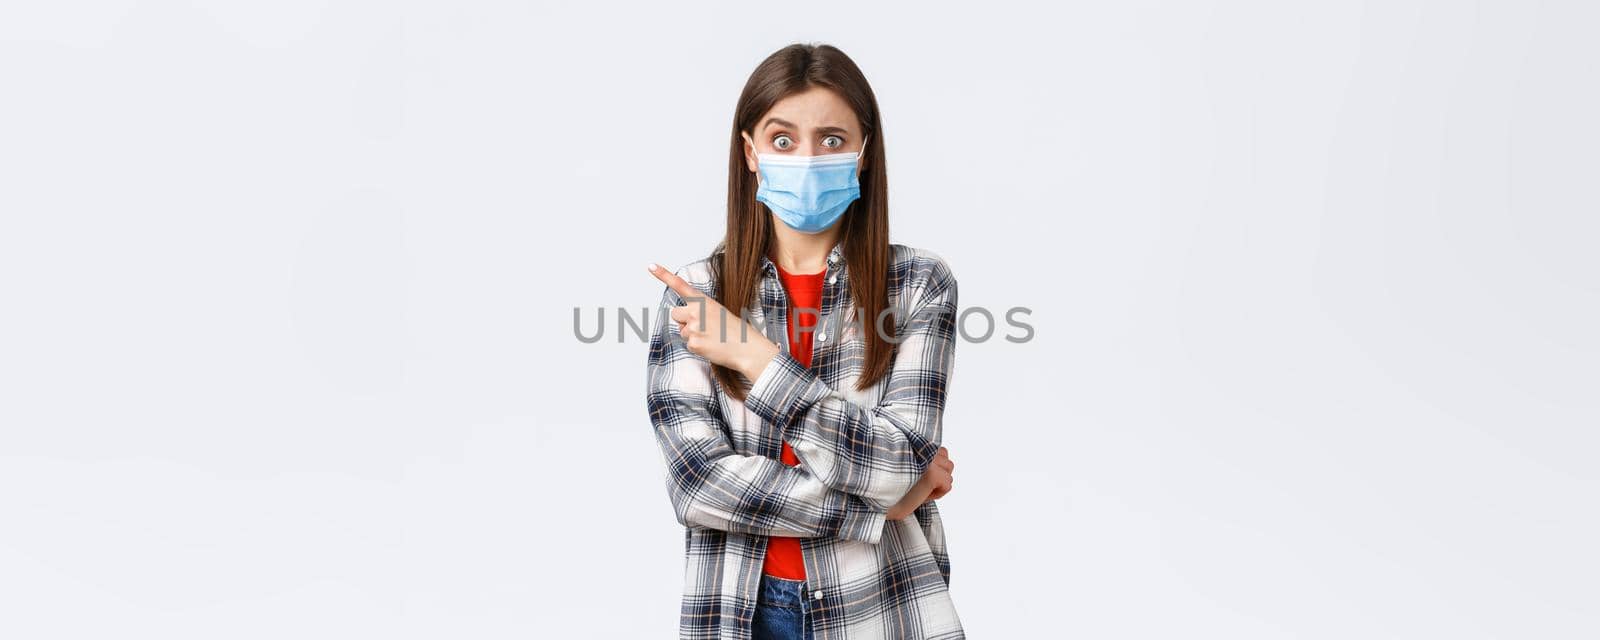 Coronavirus outbreak, leisure on quarantine, social distancing and emotions concept. Confused and worried girl asking question about smth strange, pointing finger left, wear medical mask covid-19.